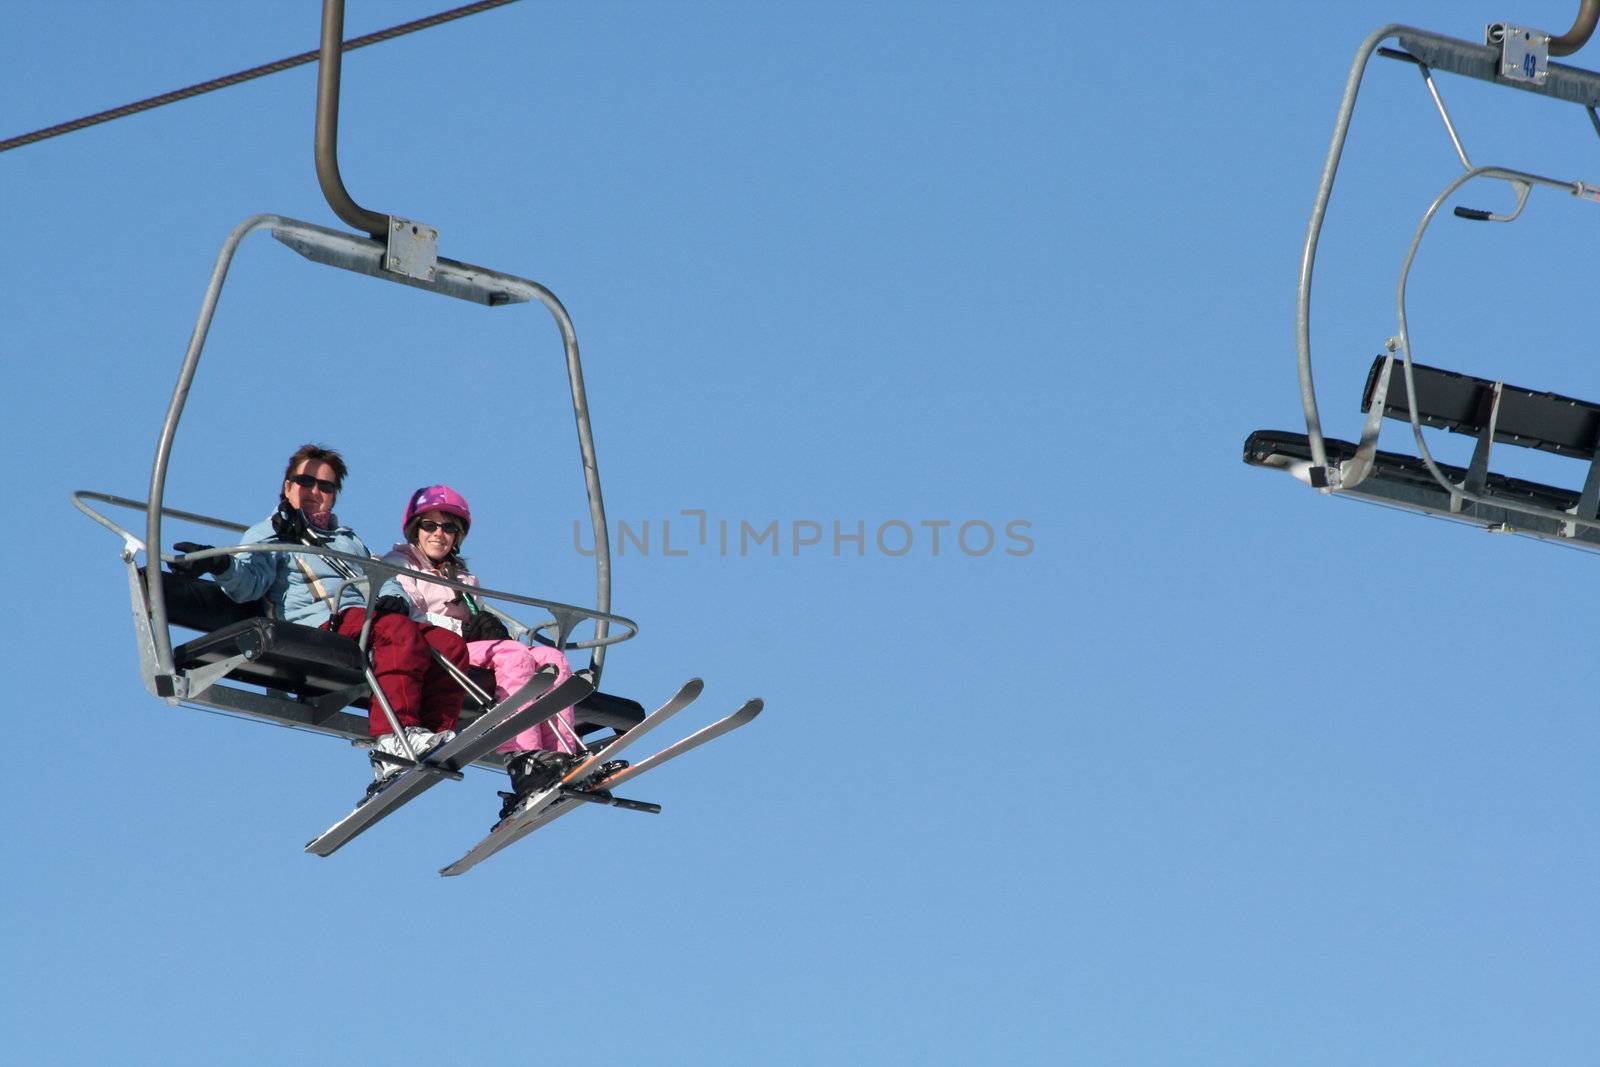 Two women riding on the ski lift on holiday.